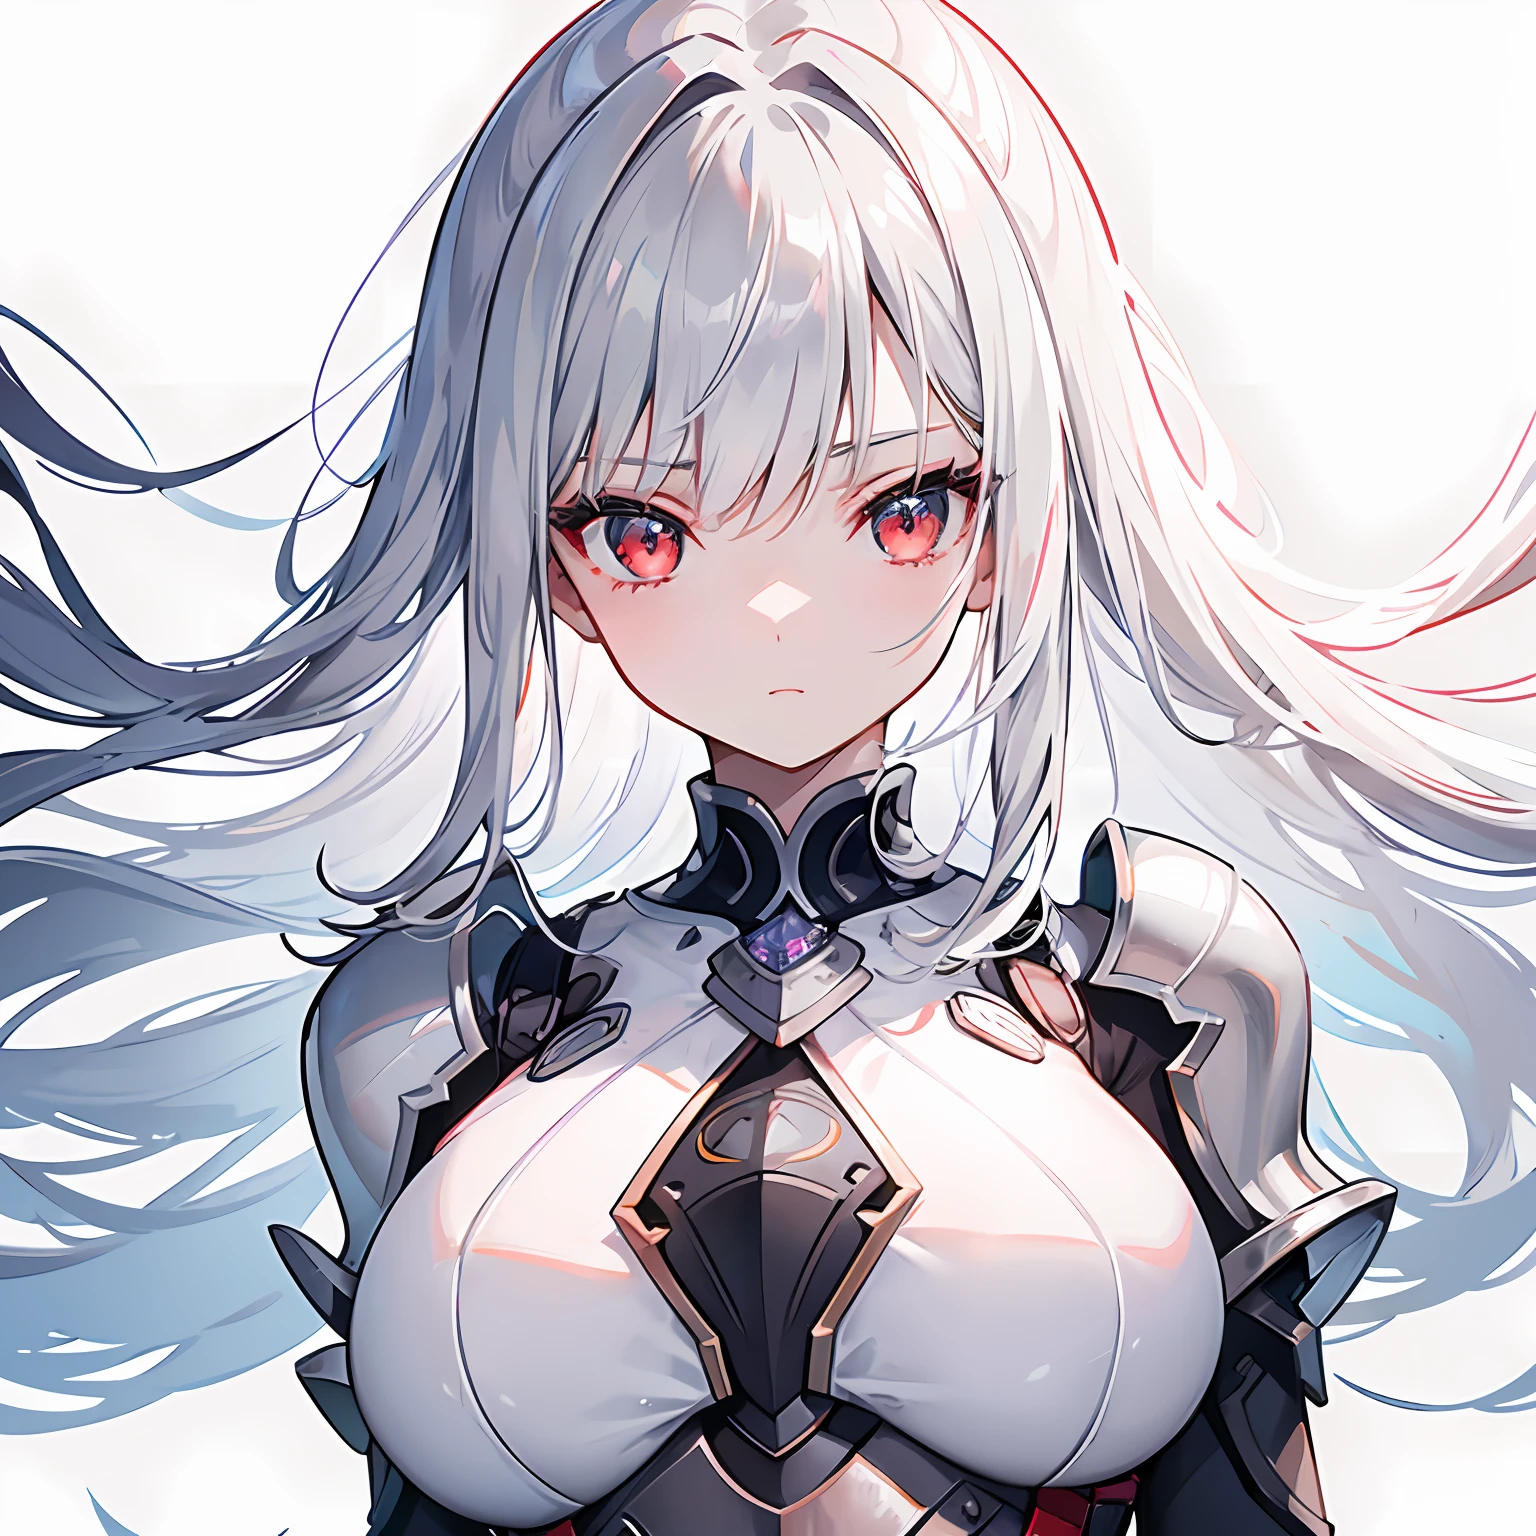 Cute adult girl standing ,girl focus, [upper body close - up], ((Plain gray background)),  poker face, upright immovable, (1girl in:1.3), Bangs,neckless ,facing front,  （white armor:1.4 ), super detail, Crystal Red Eyes,Slender, masterful technique, Long hair, animetic, Solo, Silk White hair, High quality, MastetPiece,ultra hyper-detailed,  (lovely wide breast+ breast covered by armor),[wide hip] , Beautiful Girl, [Detail Face], detail hands, ultra detail eyes,nothing face emotion, Beautiful eyes